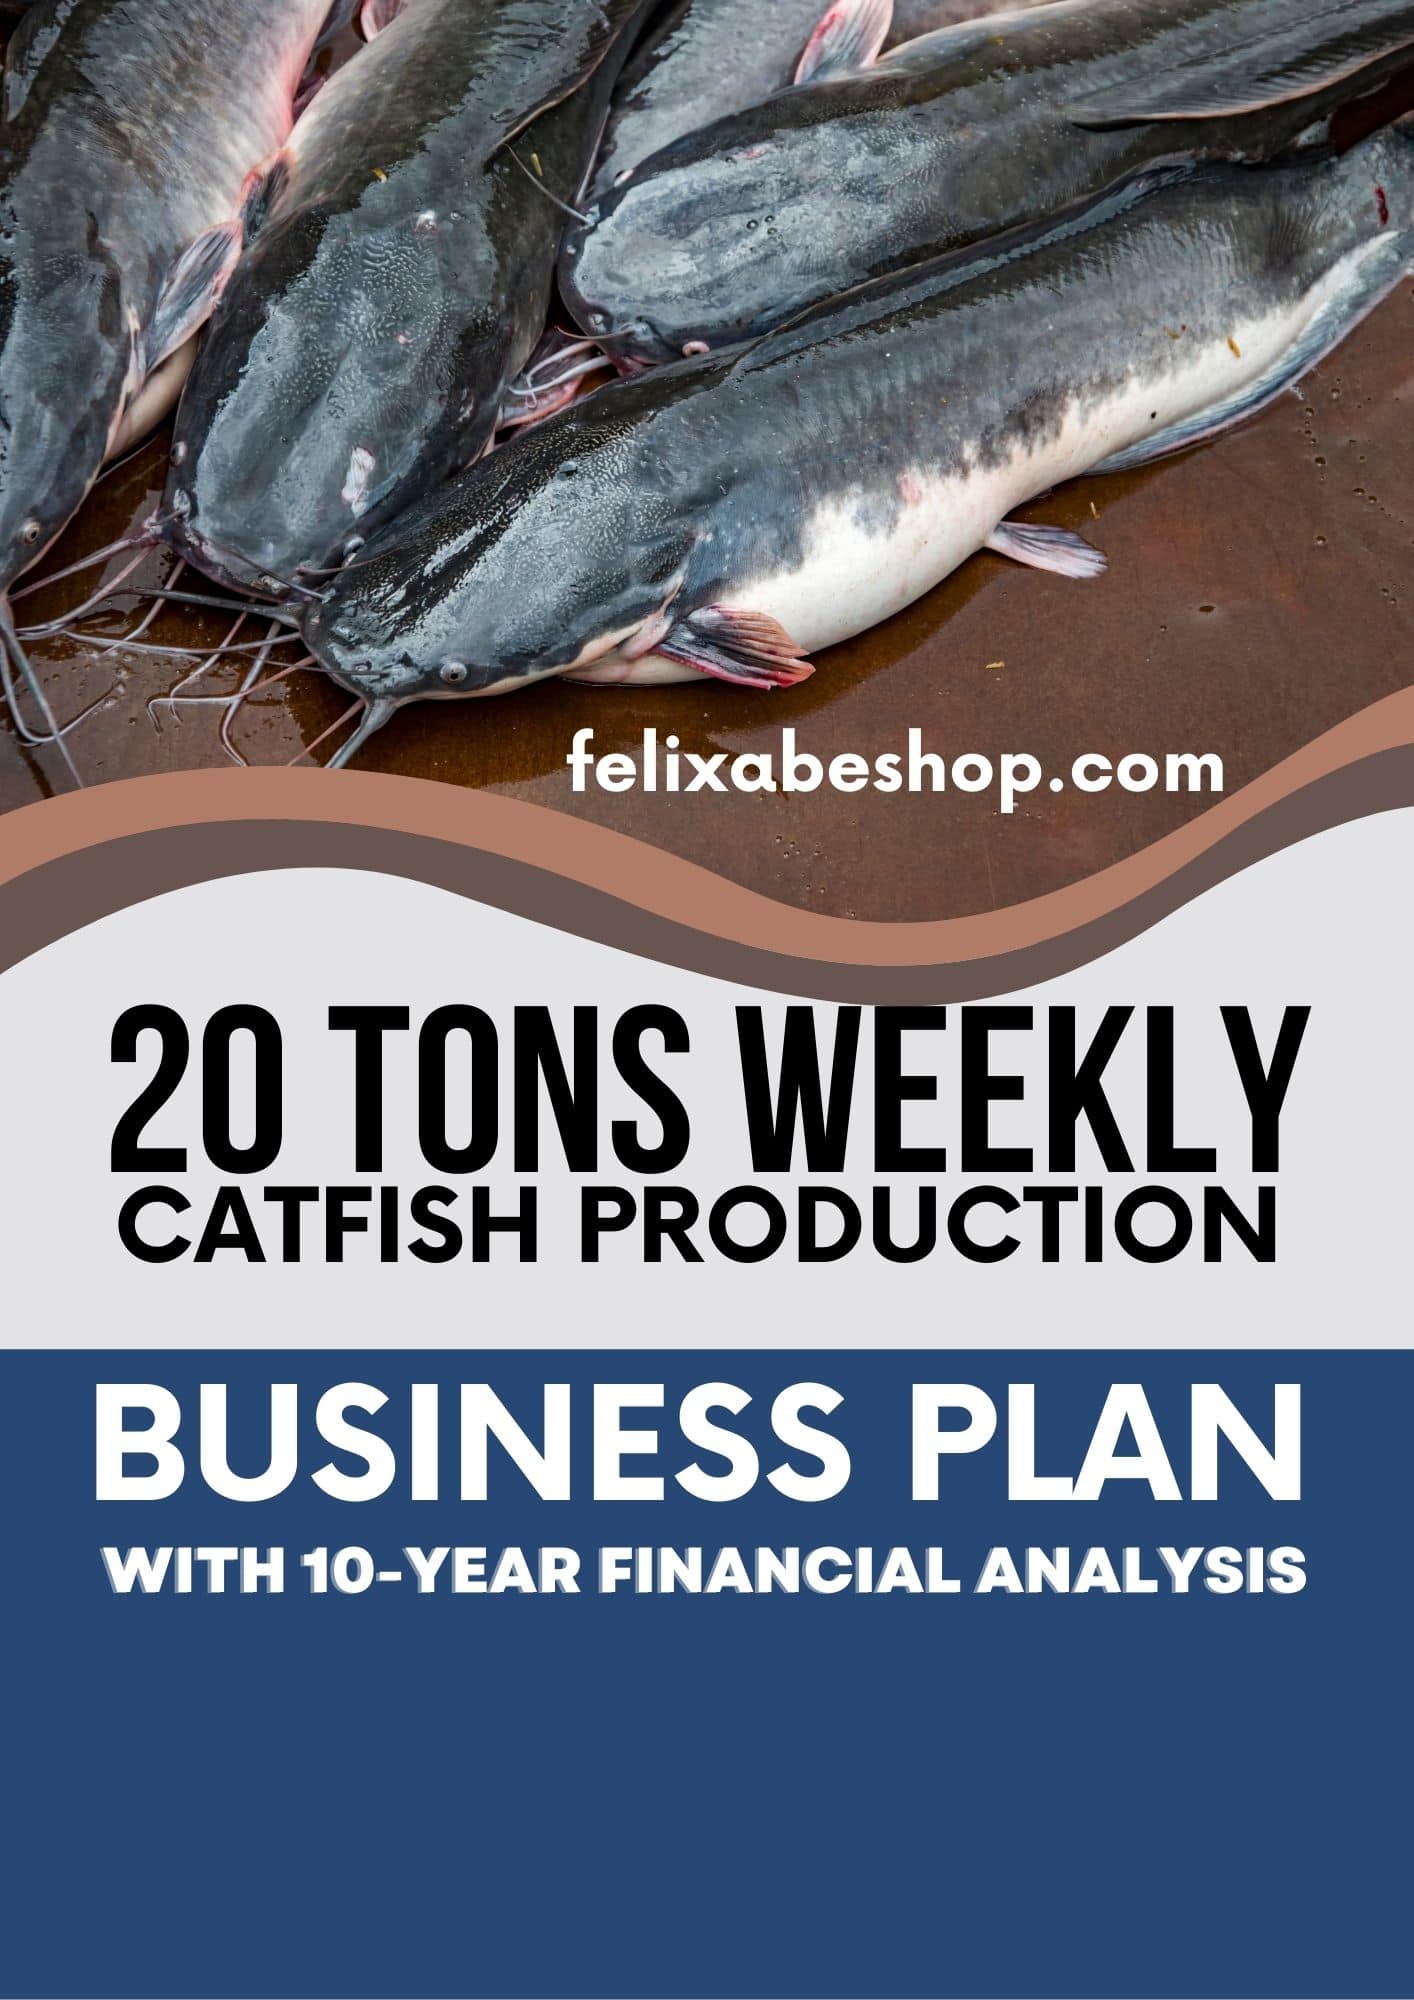 business plan for catfish production